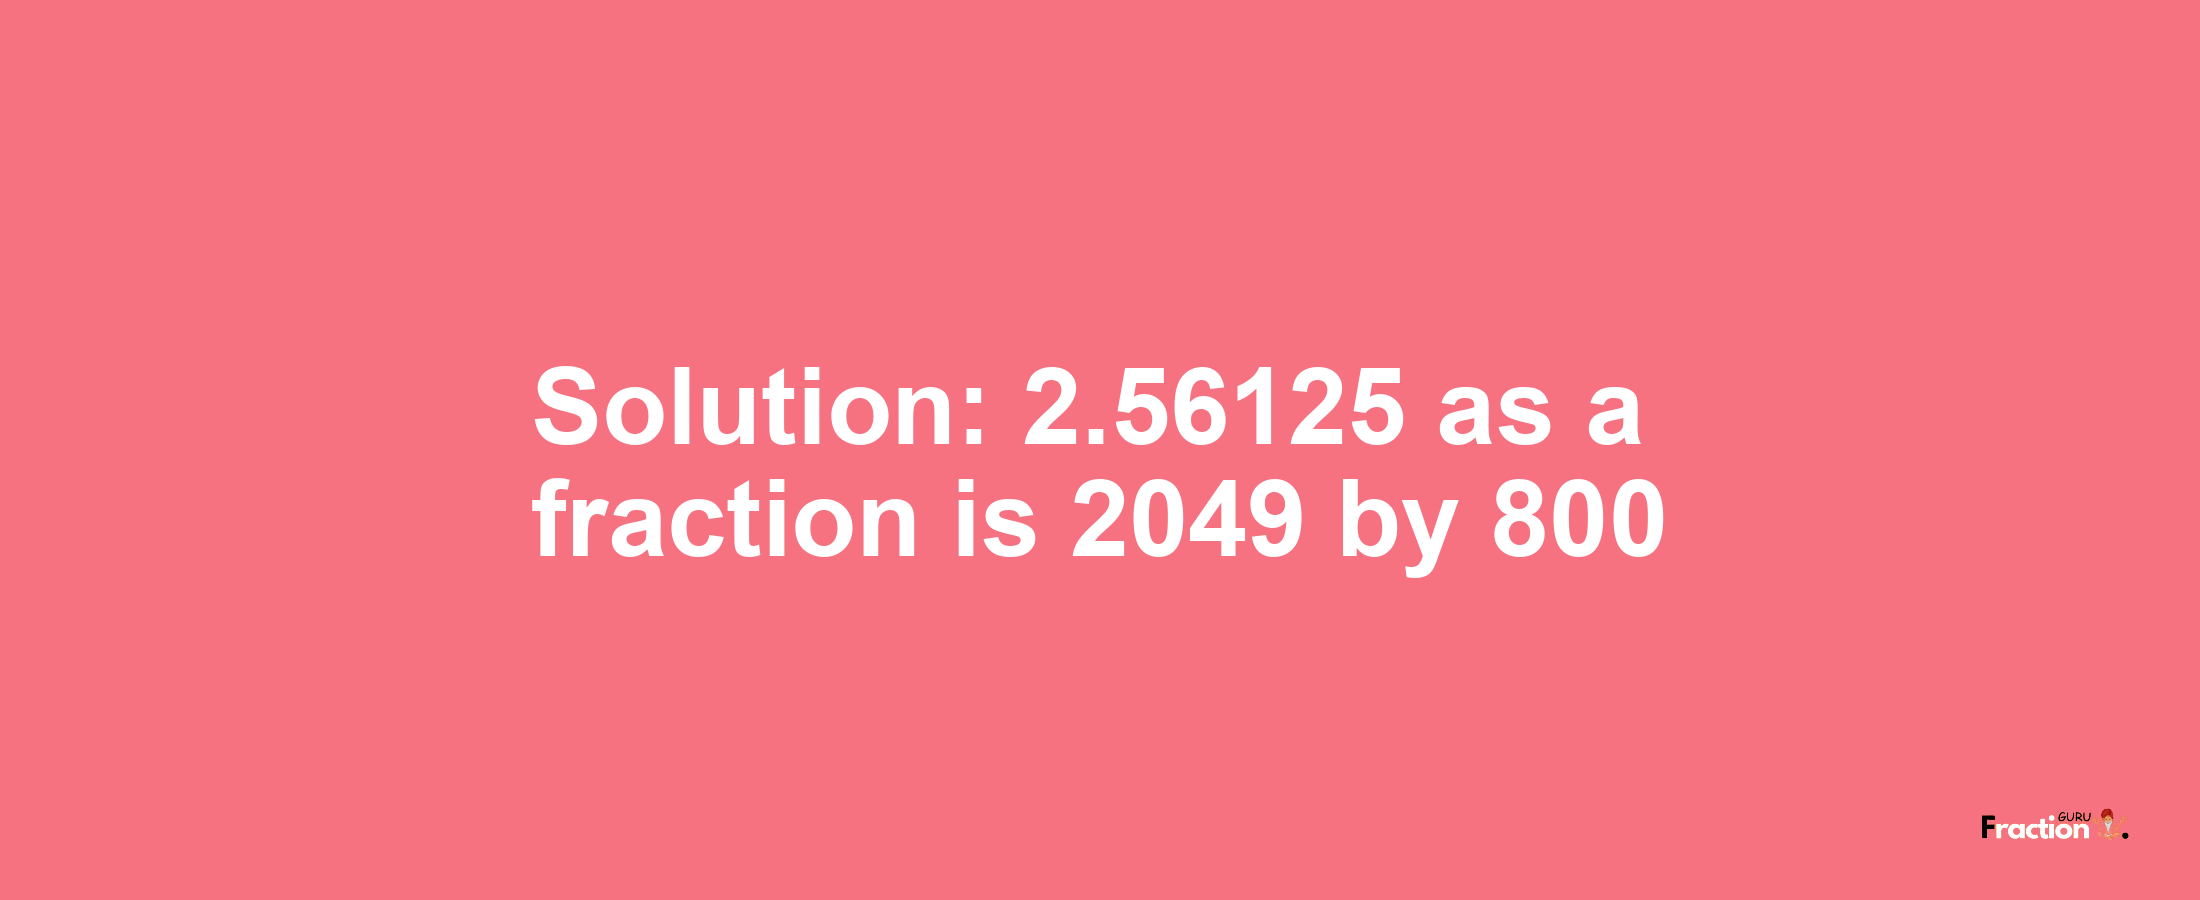 Solution:2.56125 as a fraction is 2049/800